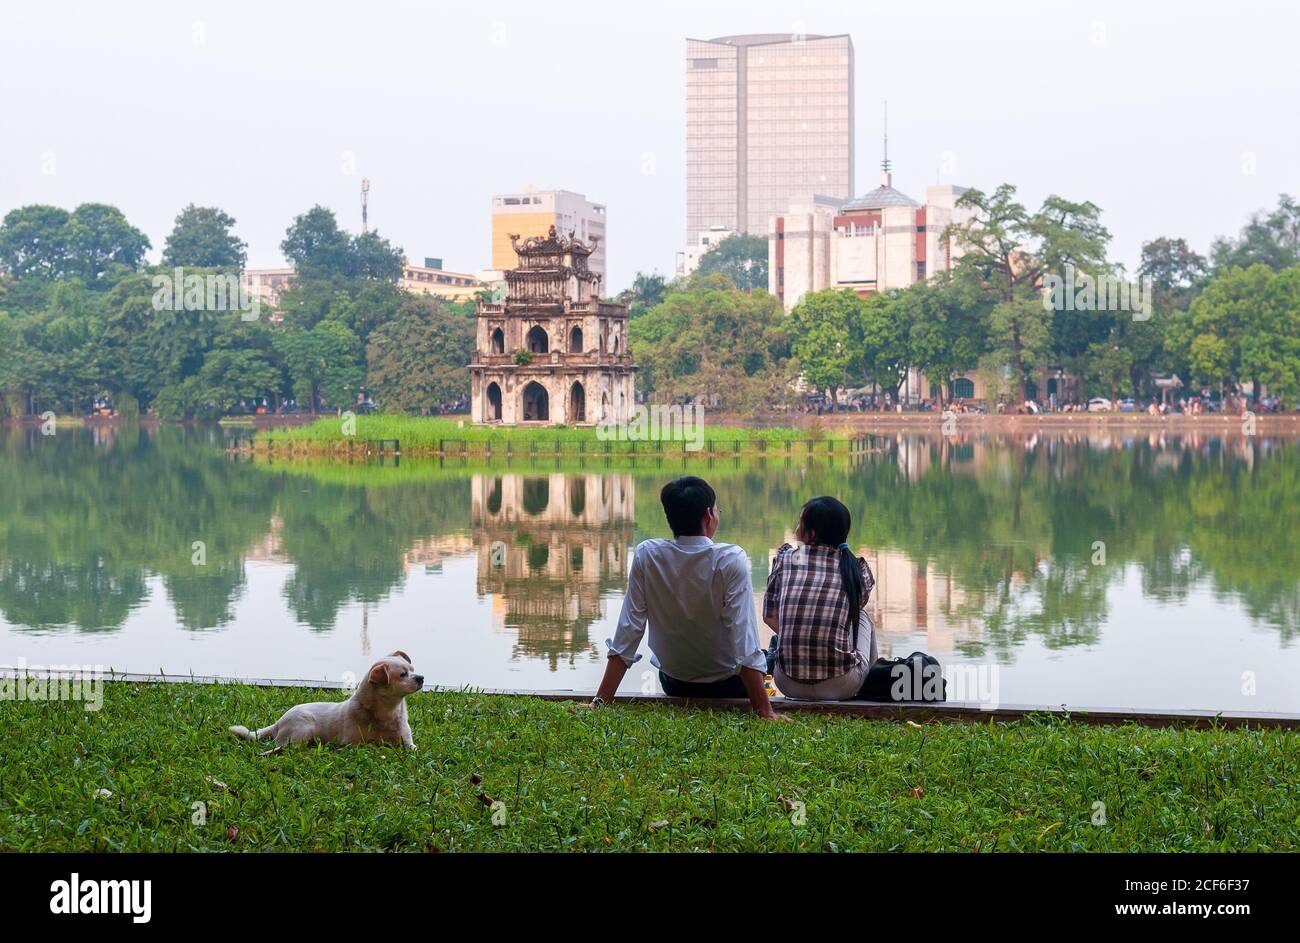 Friends talking along the Hoan Kiem lake with the turtle pagoda and modern buildings in the background in Hanoi, Vietnam. Stock Photo